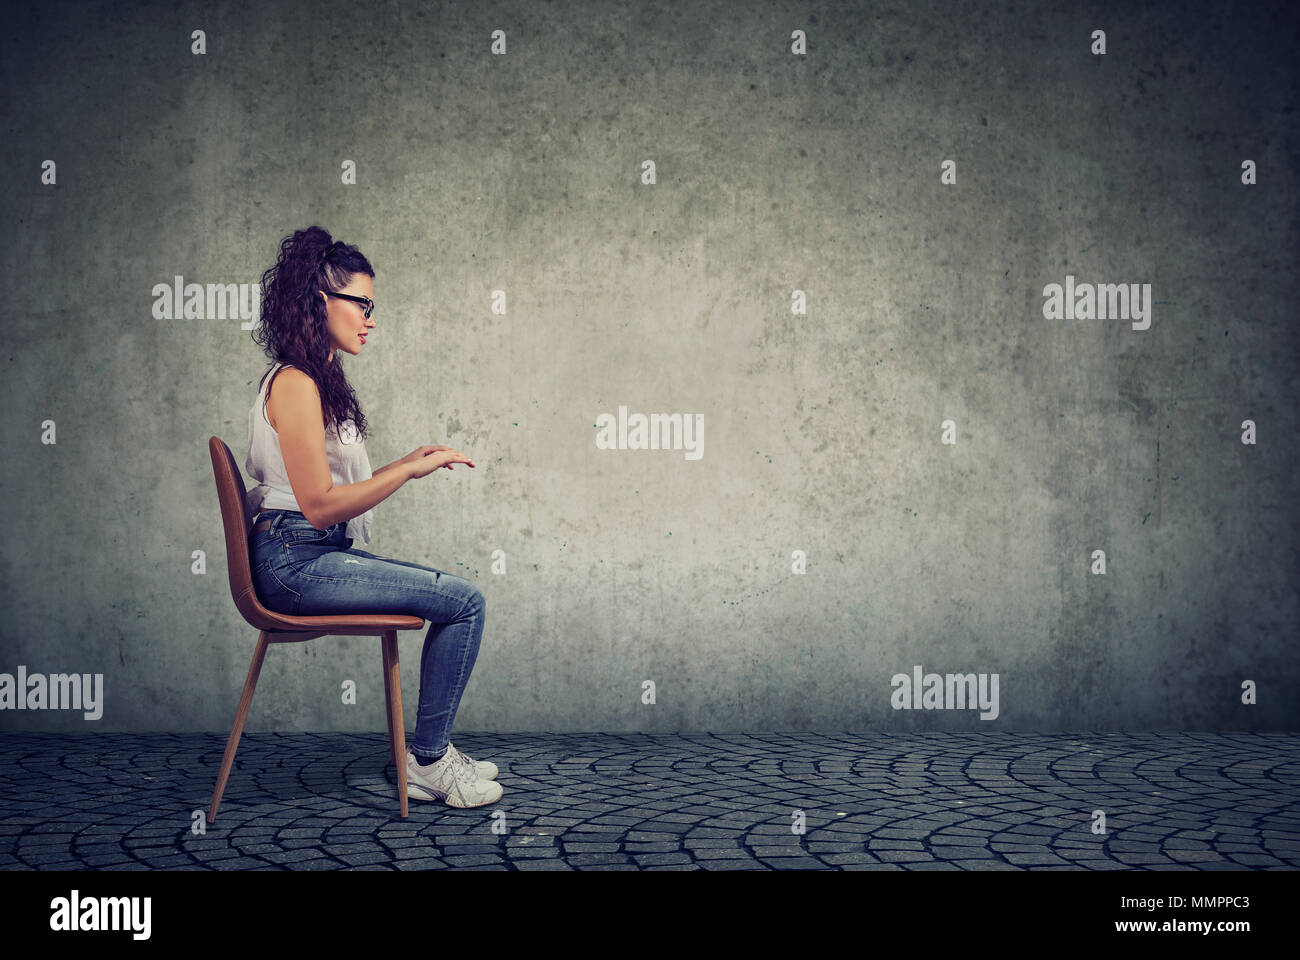 139,181 Woman Sitting At Desk Stock Photos, High-Res Pictures, and